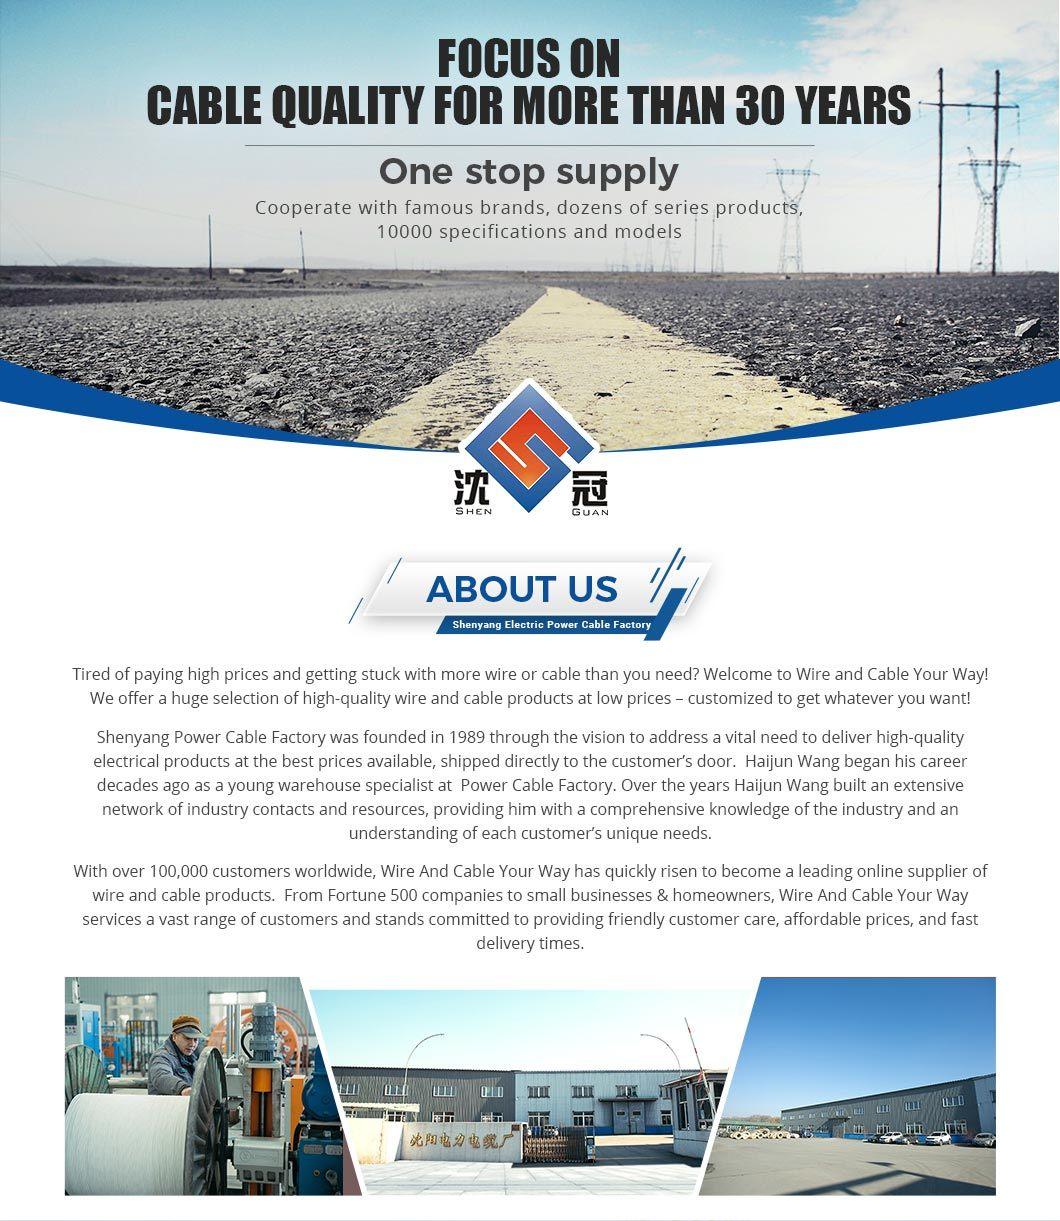 Shenguan Wire Cable Oil and UV Resistance Highly Flexible Control and Power Cable Low Voltage Cable